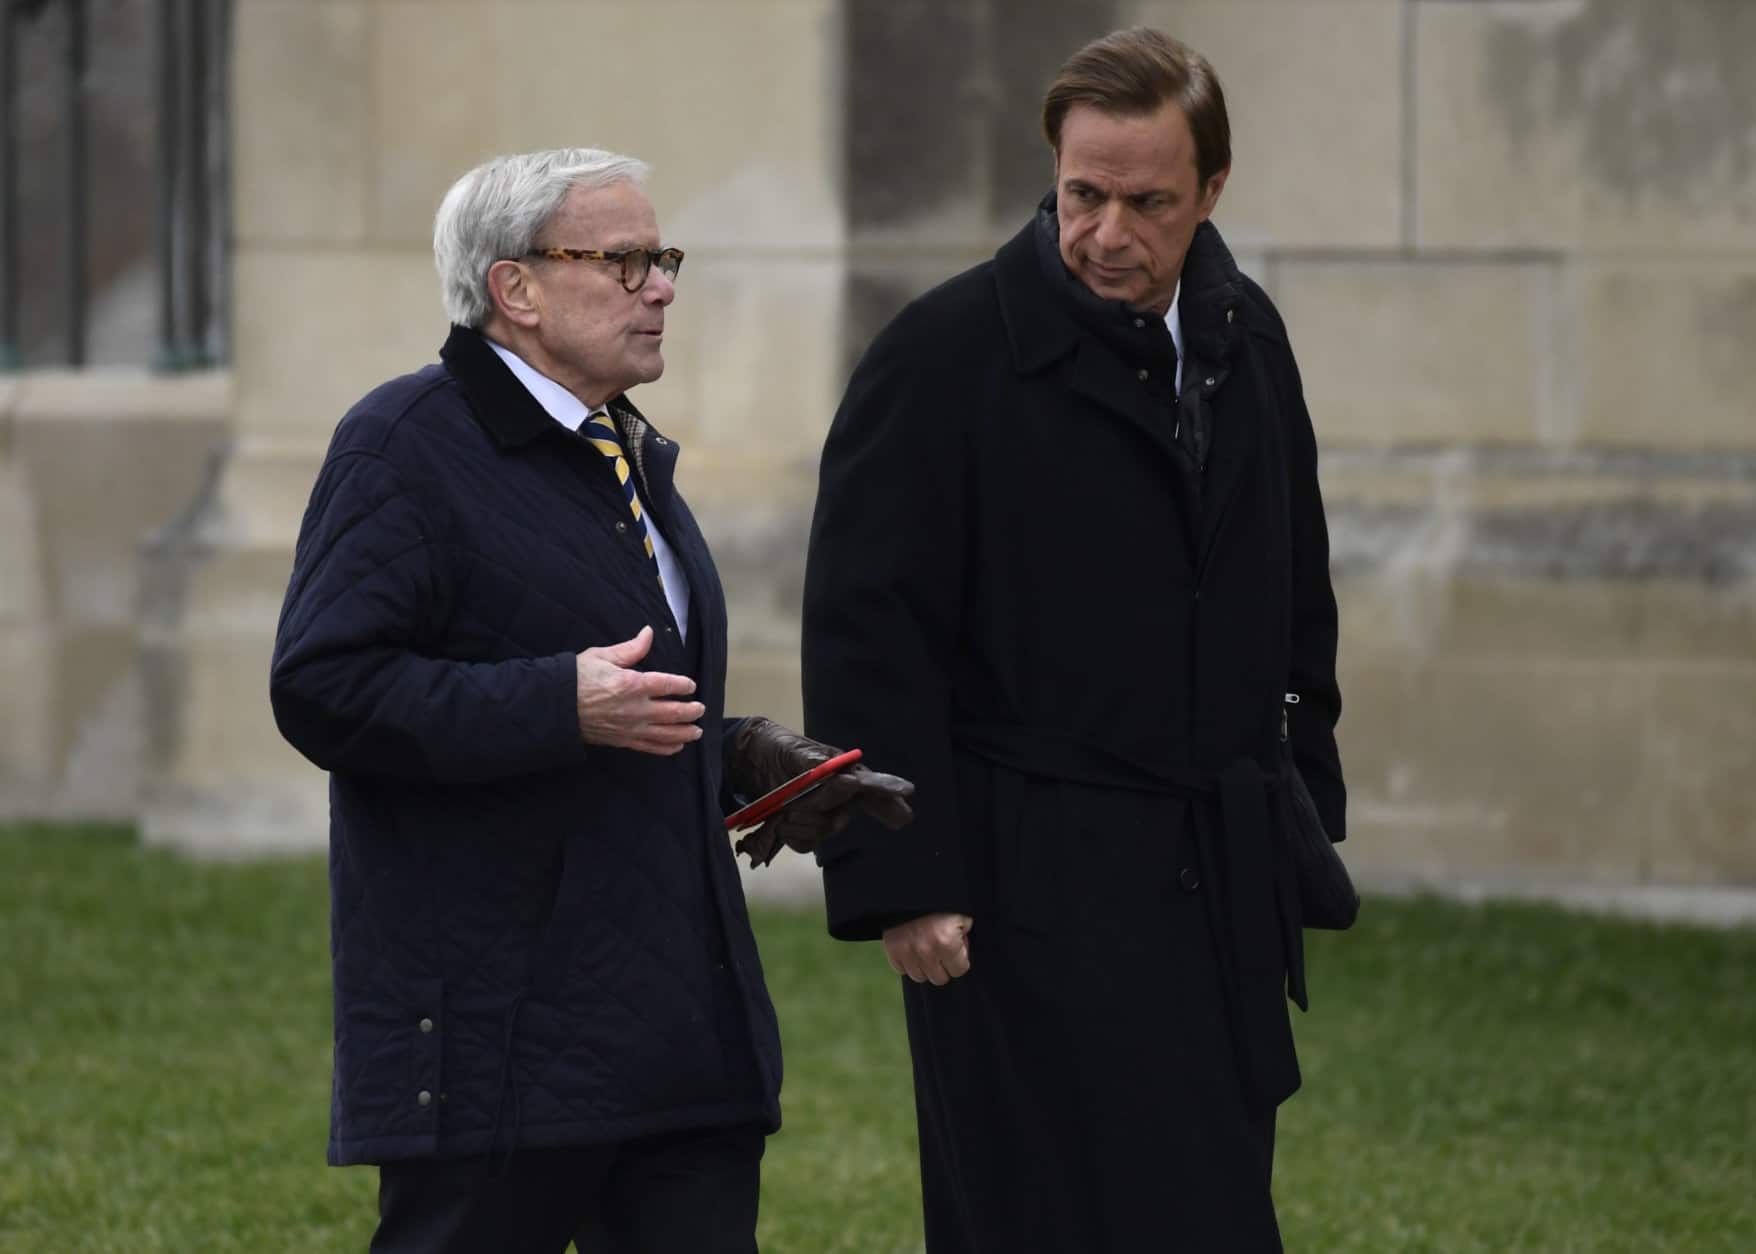 Television newsman Tom Brokaw, left, and presidential historian Michael Beschloss, right, arrive for the State Funeral of former President George H.W. Bush at the National Cathedral in Washington, Wednesday, Dec. 5, 2018. (AP Photo/Susan Walsh)